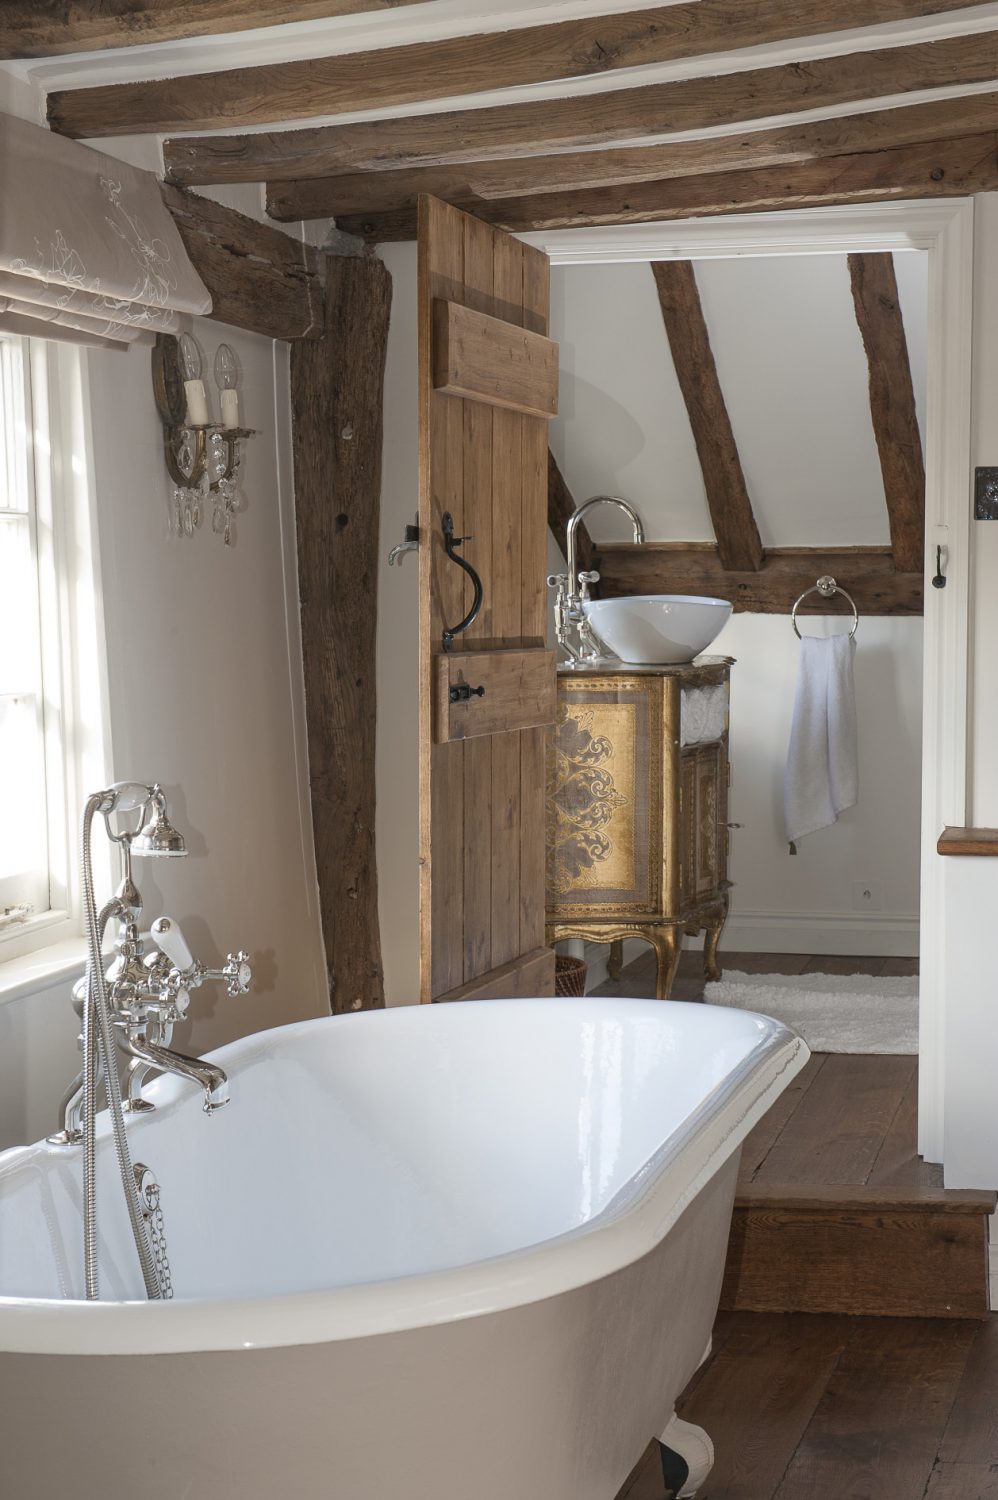 Charlotte and Andrew remodelled their en suite to provide both a romantic bathroom, with a rolltop bath, and a double-shower room